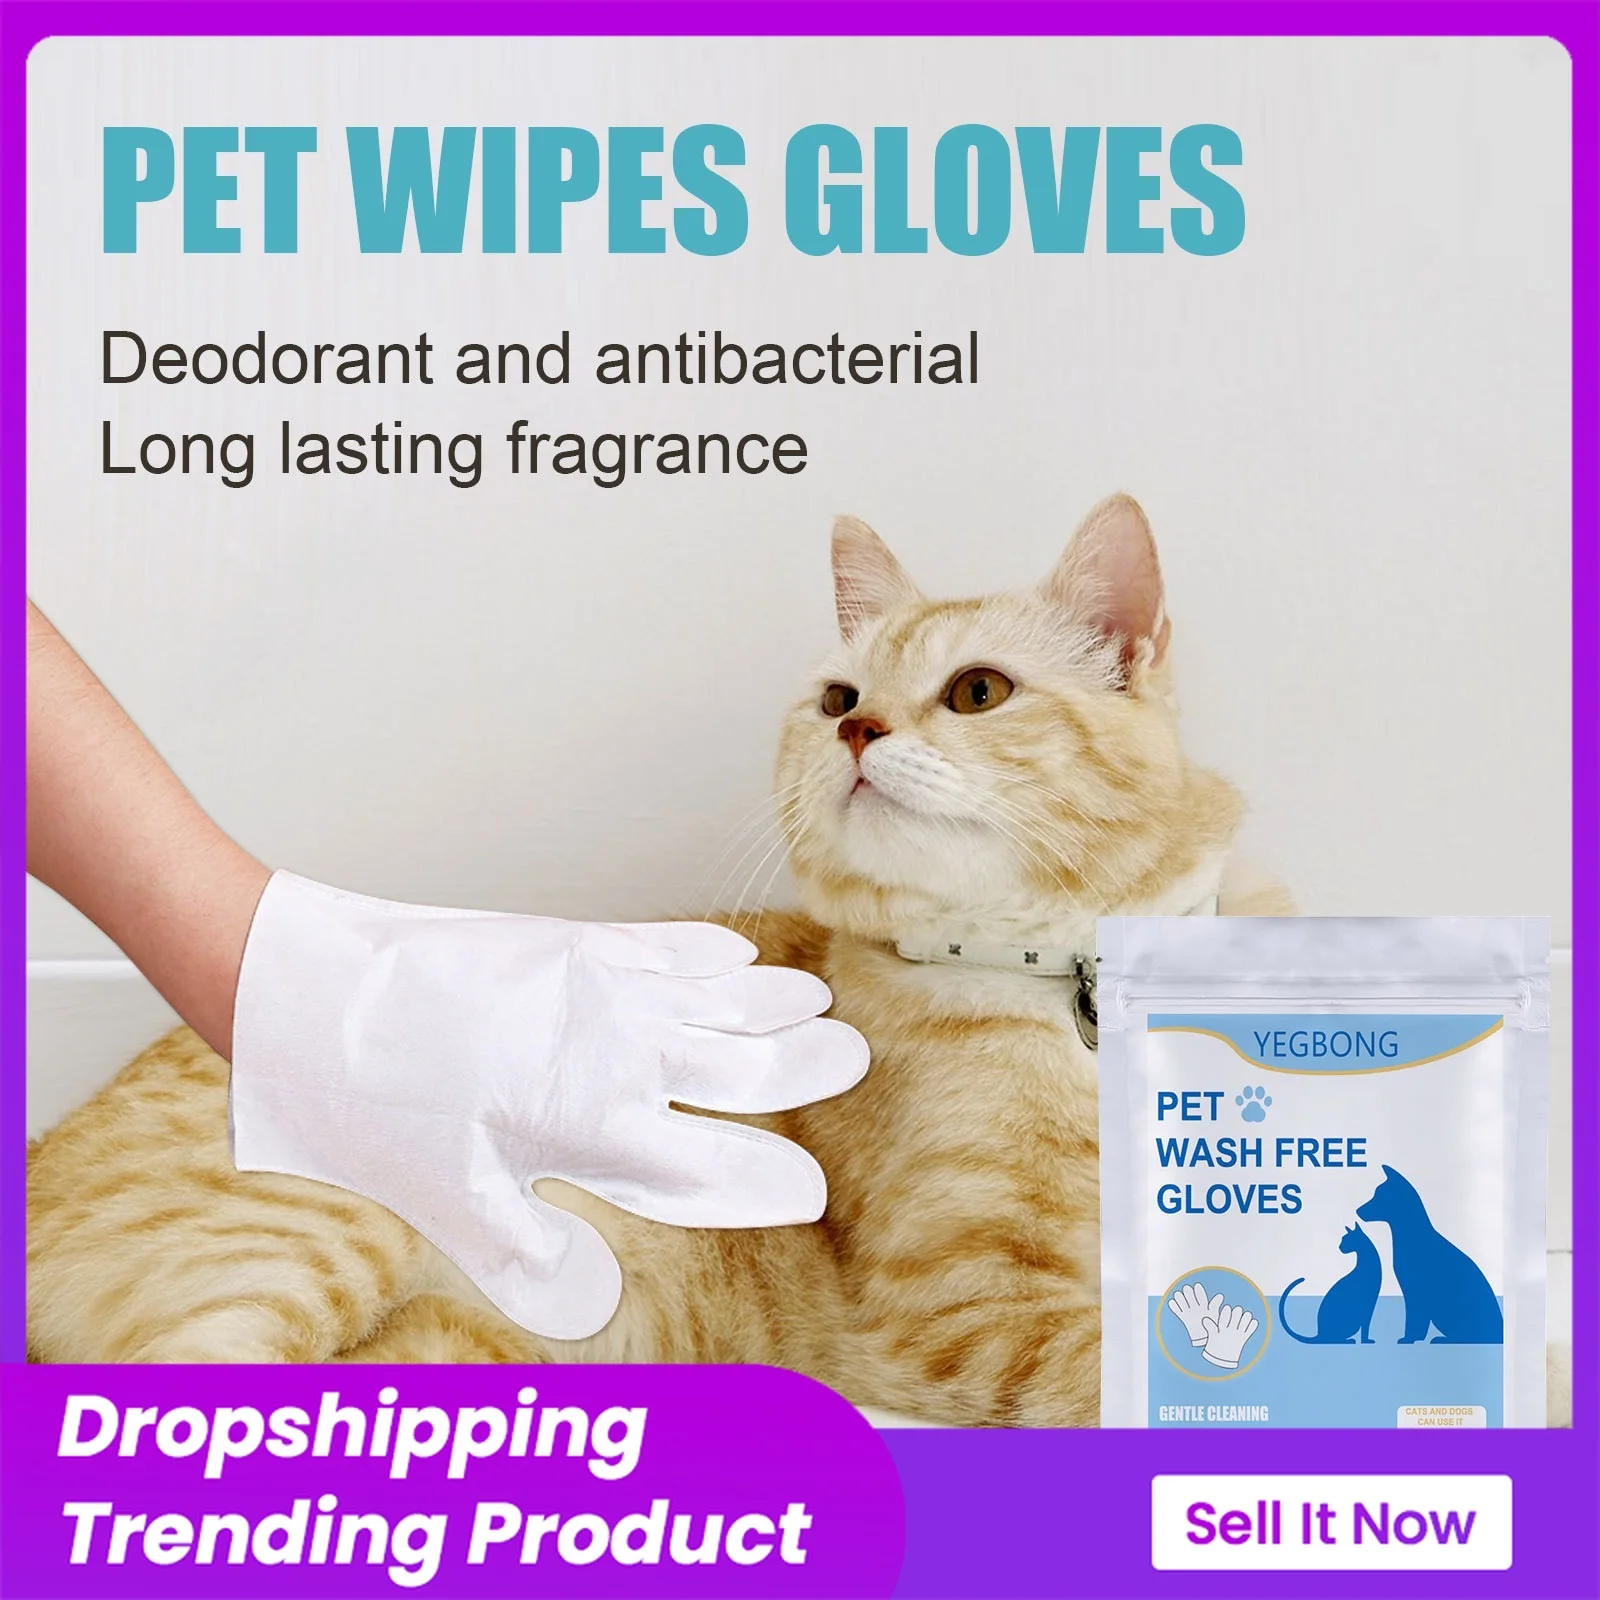 

Grooming Glove Pet Disposable Cleaning Gloves No Rinse Home Travel Cats Dogs SPA Bath Supplies Odorless Deodorant Antibacterial